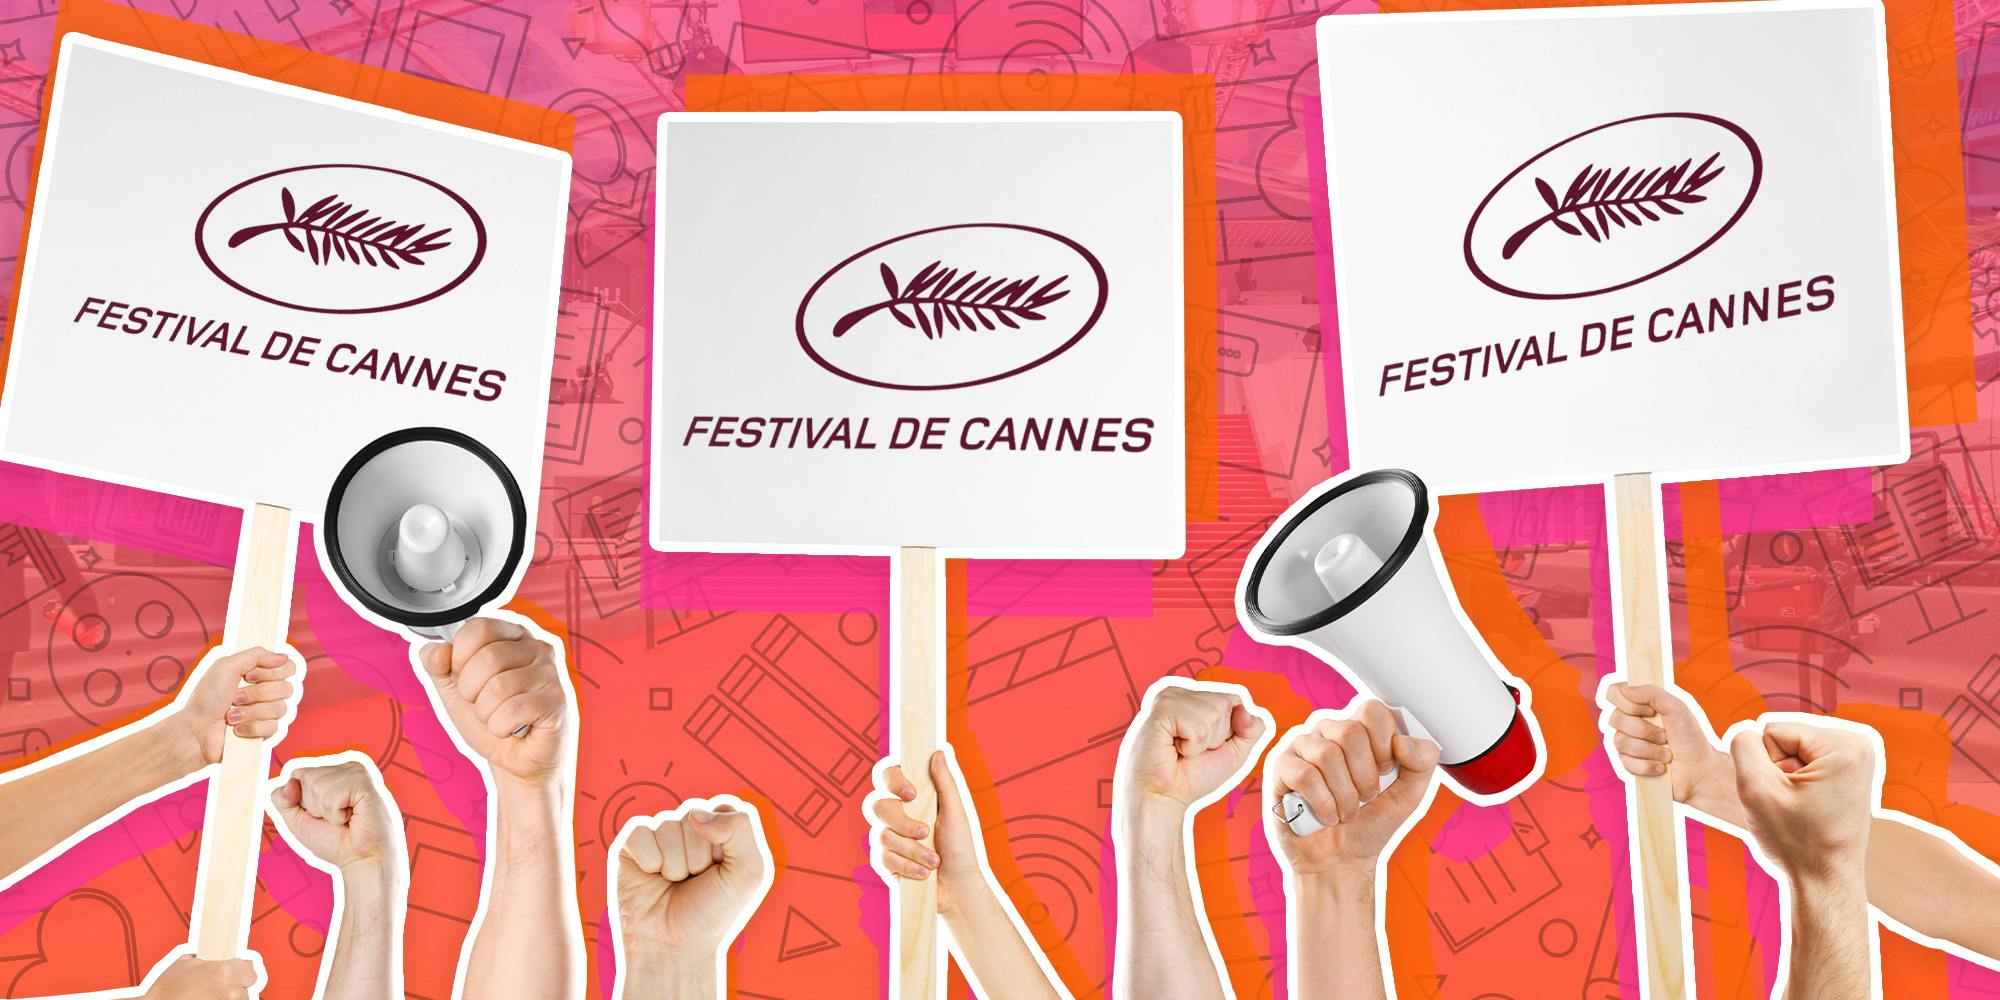 Cannes Film Festival workers are on strike